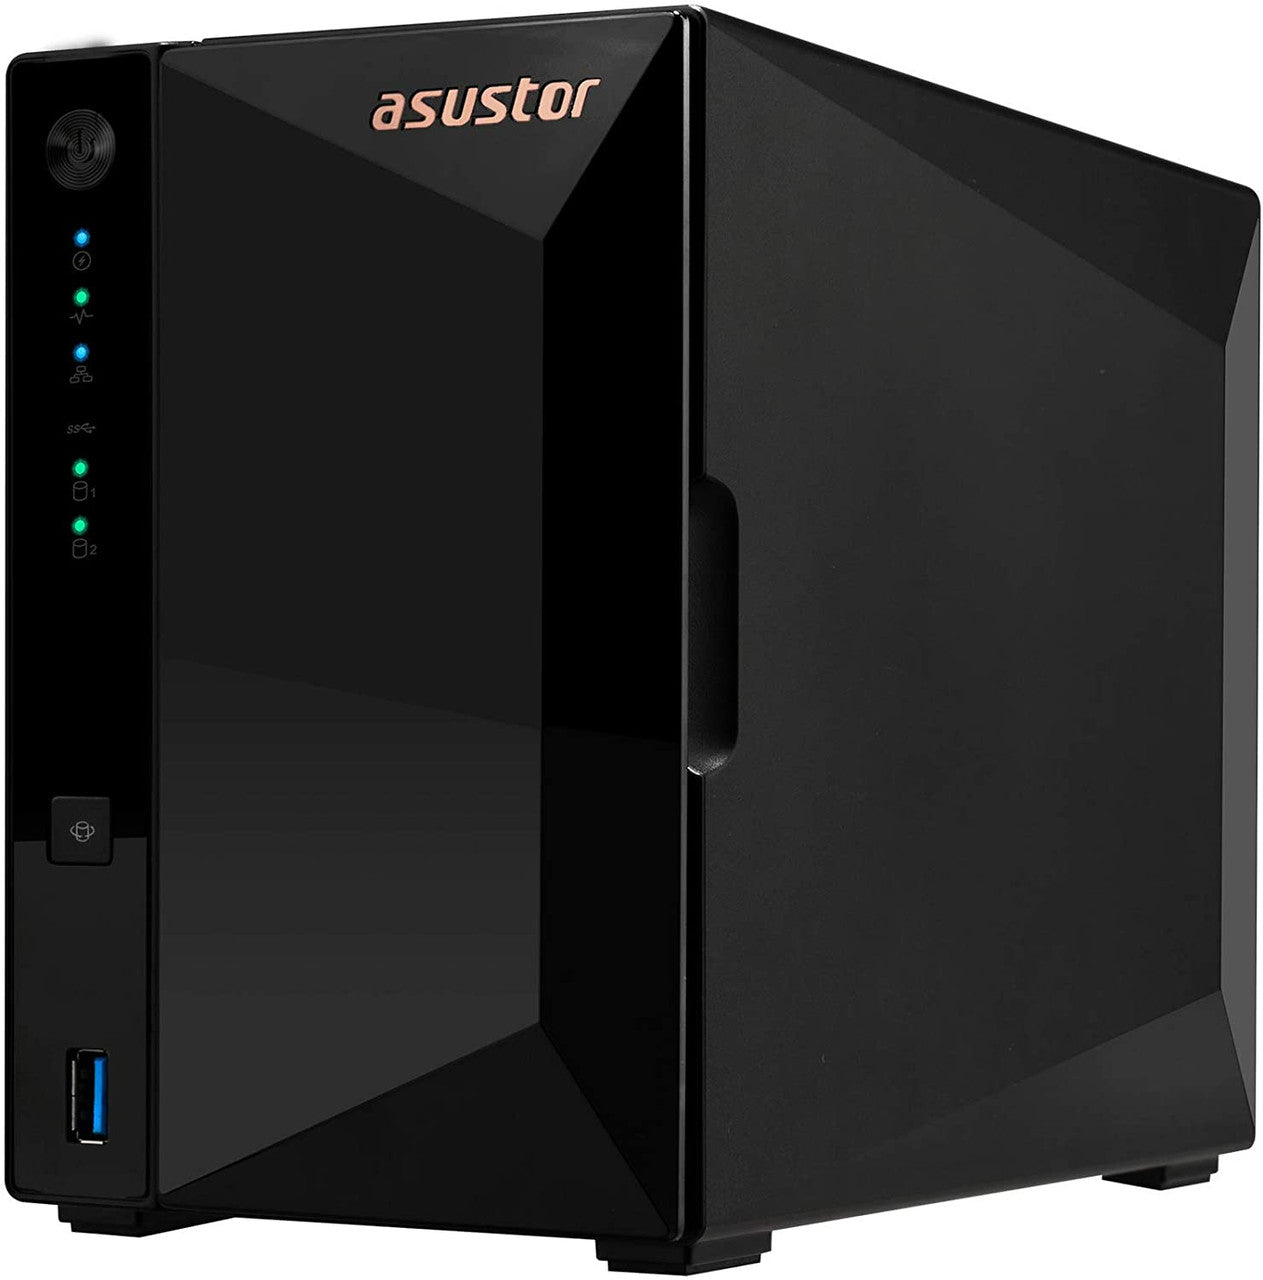 Asustor AS3302T 2-Bay Drivestor 2 PRO NAS with 2GB RAM and 12TB (2x6TB) Western Digital RED Plus Drives Fully Assembled and Tested